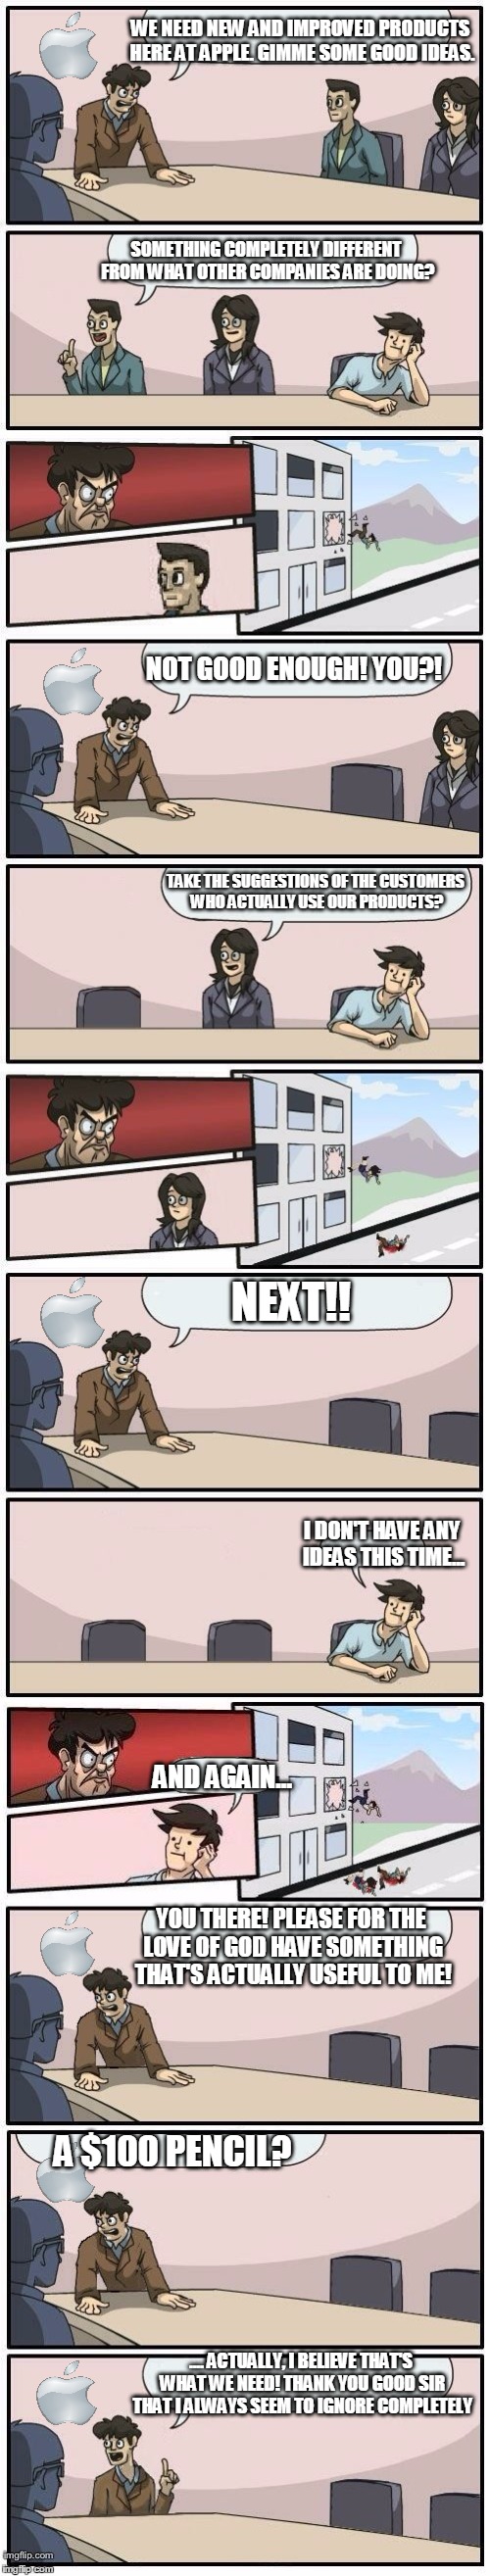 Boardroom Meeting Suggestions Extended | WE NEED NEW AND IMPROVED PRODUCTS HERE AT APPLE. GIMME SOME GOOD IDEAS. SOMETHING COMPLETELY DIFFERENT FROM WHAT OTHER COMPANIES ARE DOING?  | image tagged in boardroom meeting suggestions extended | made w/ Imgflip meme maker